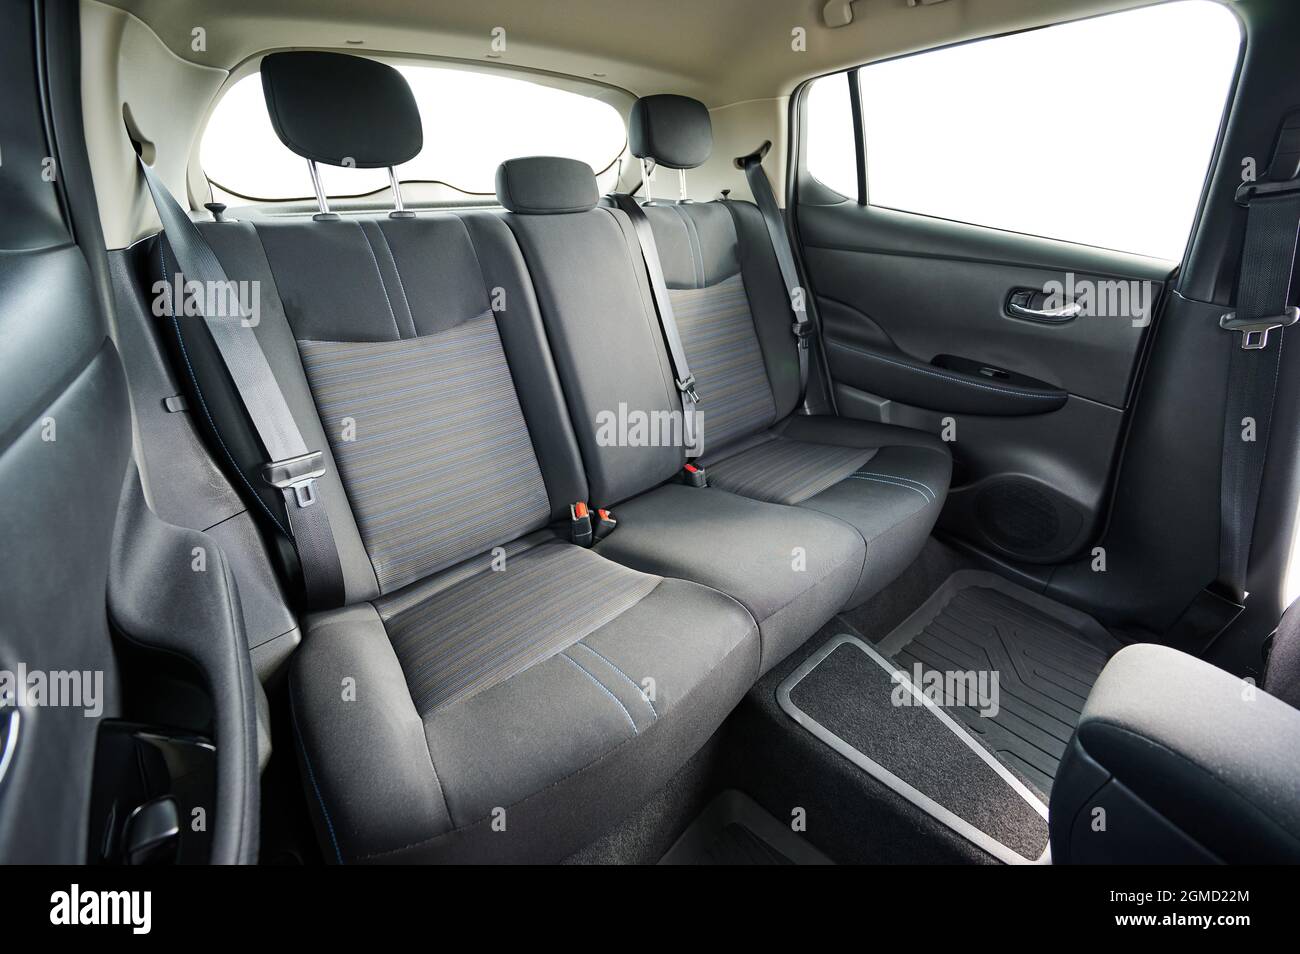 https://c8.alamy.com/comp/2GMD22M/clean-textile-car-back-seat-isolated-on-white-studio-background-2GMD22M.jpg